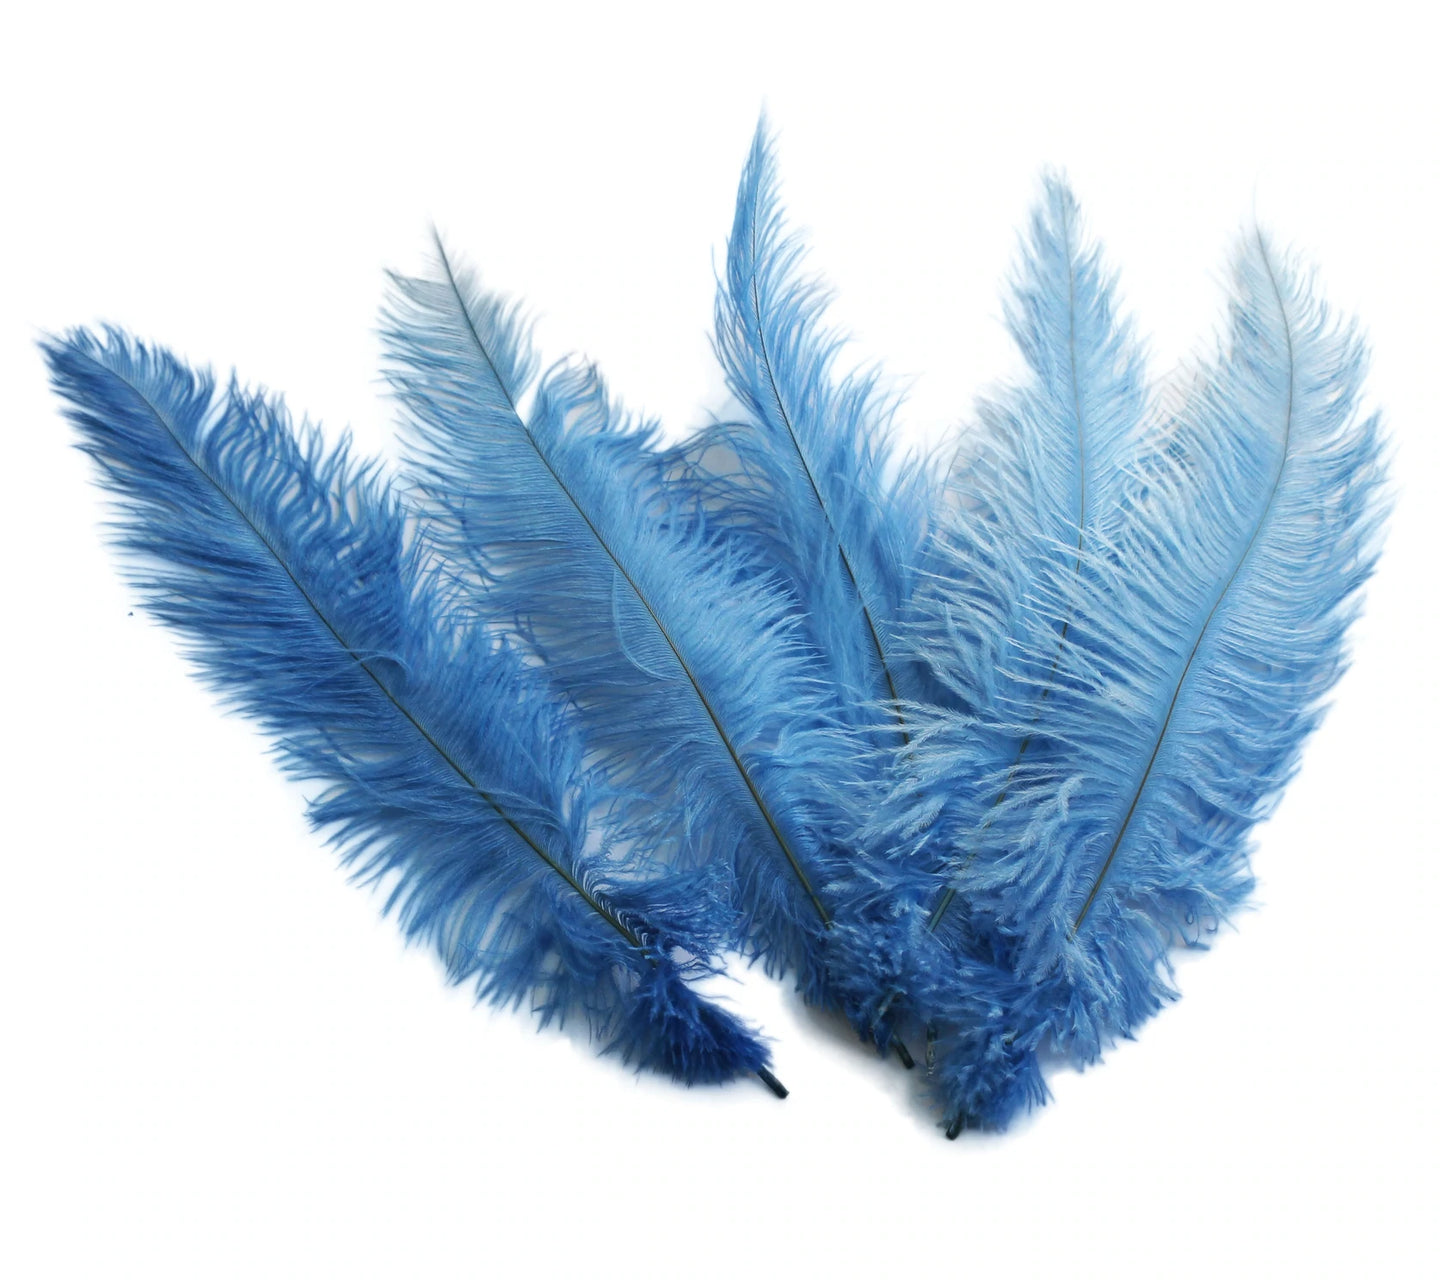 Ostrich Feather Spad Plumes 15-18" (Baby Blue) - Buy Ostrich Feathers